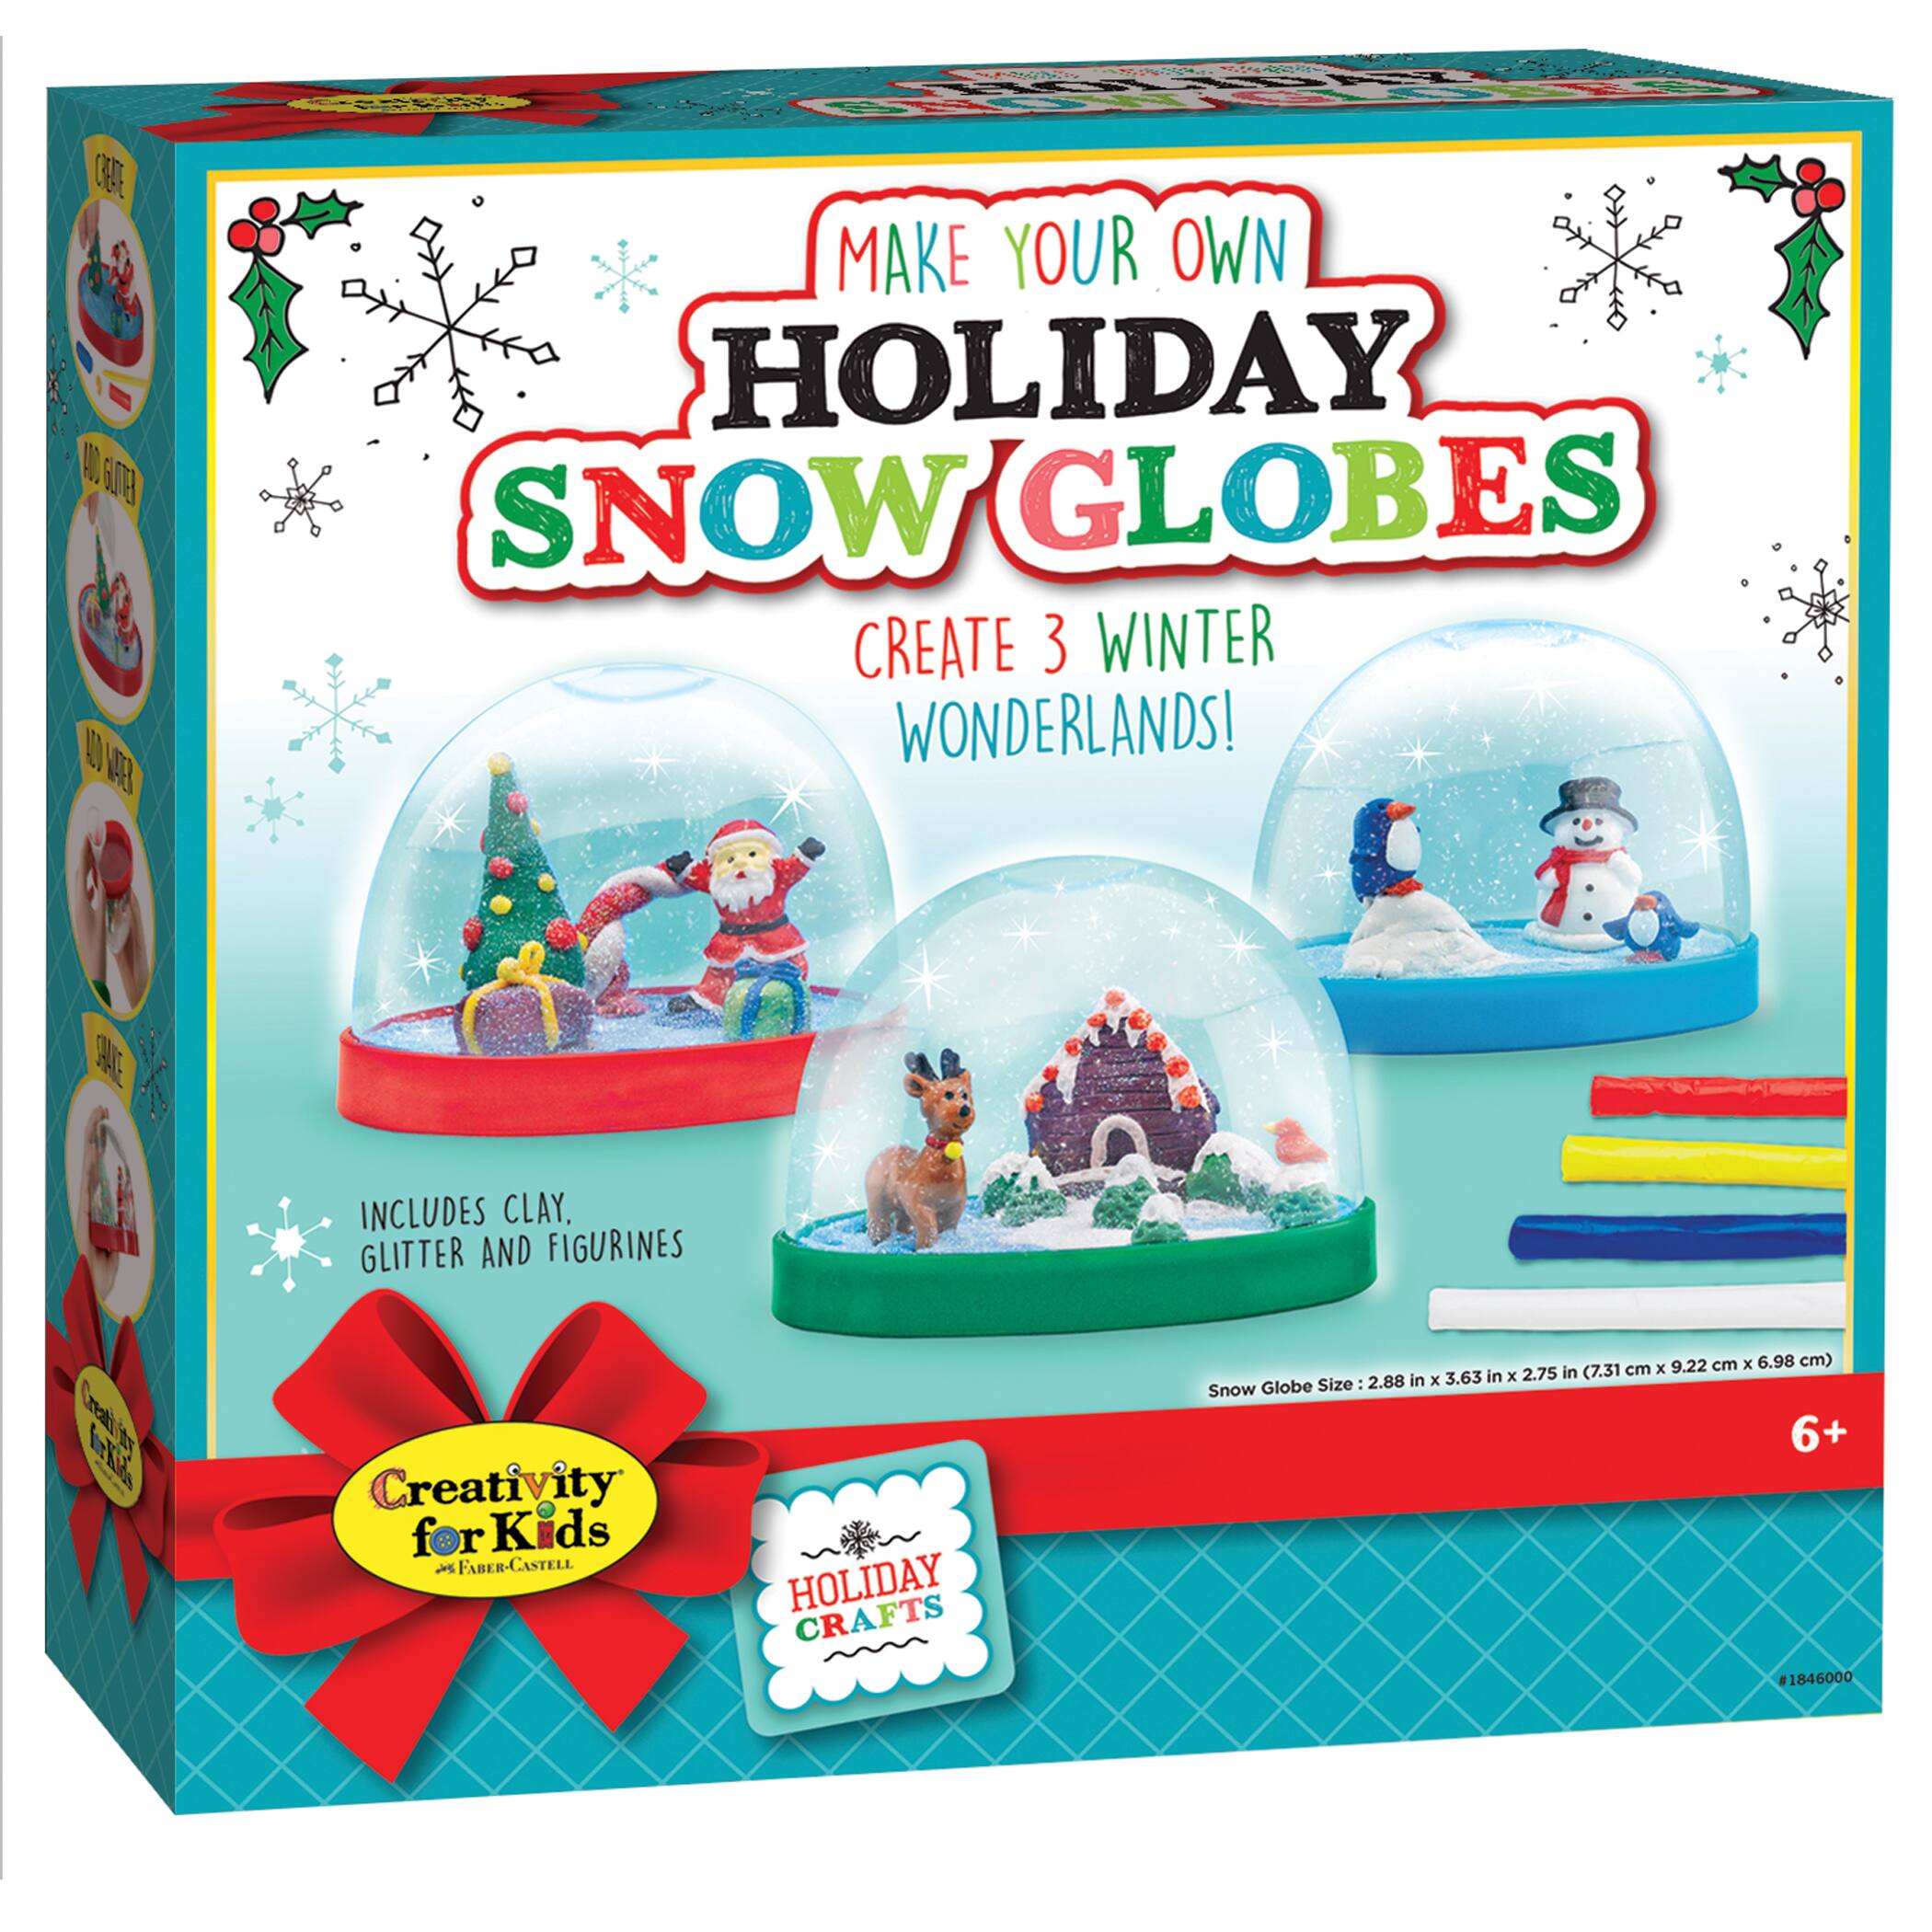 Creativity for Kids Make Your Own Holiday Snow Globes Kit